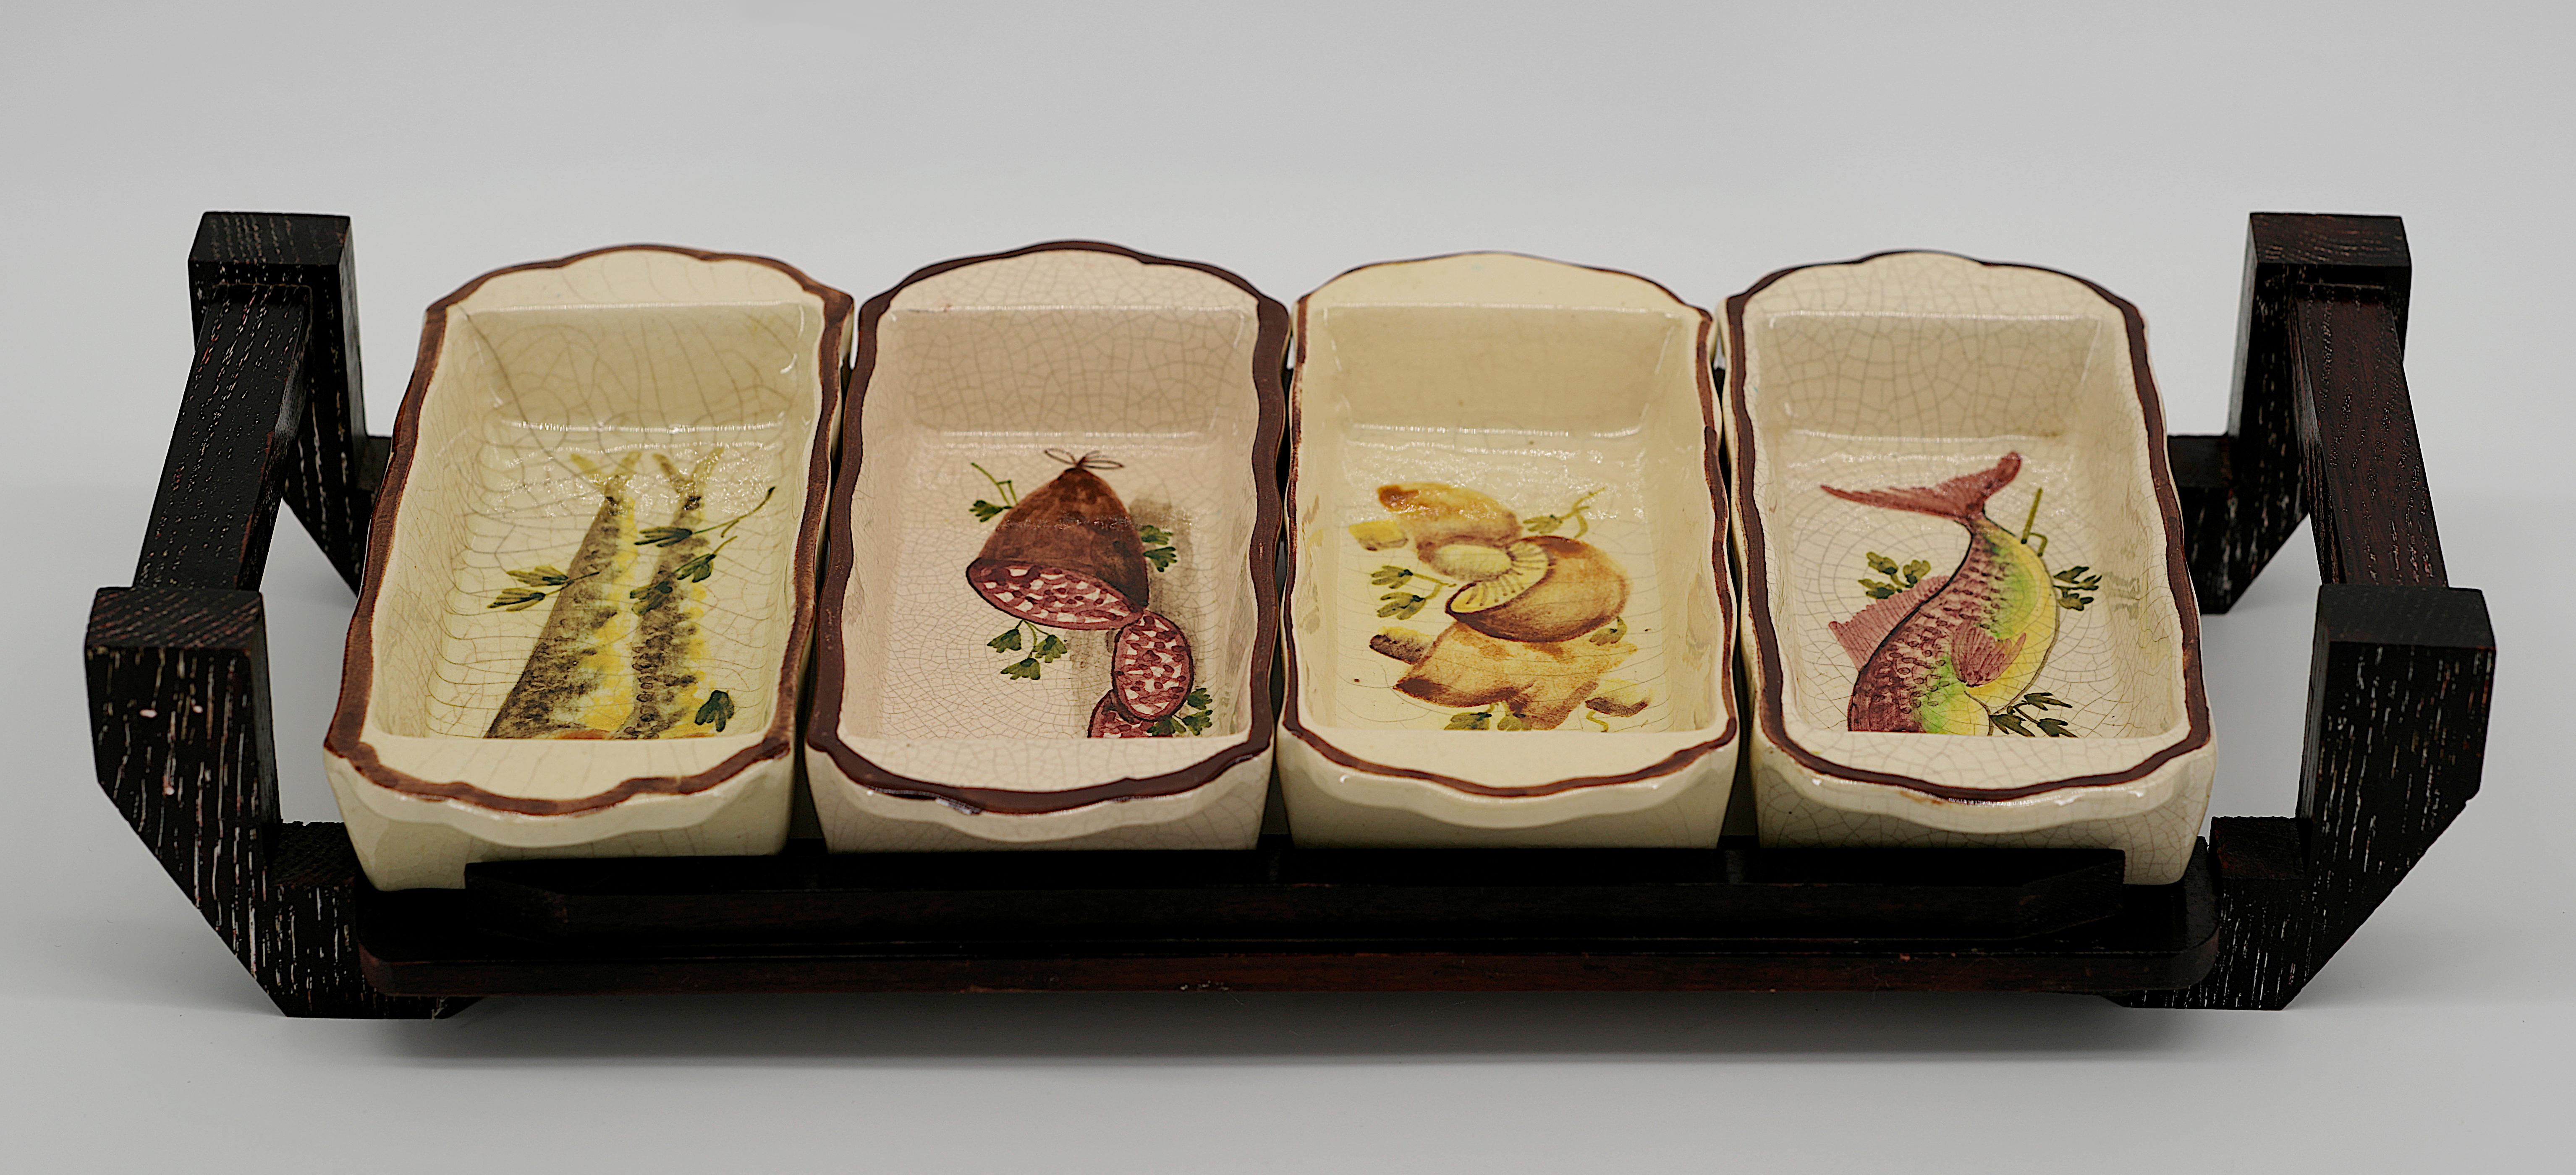 French Mid-century appetizer dishes, Vallauris, 1960s. Set of 4 ceramic dishes and a wooden tray. Each dish shows a different decor. Mushrooms, sardines, fish and sausage. Width : 18.4